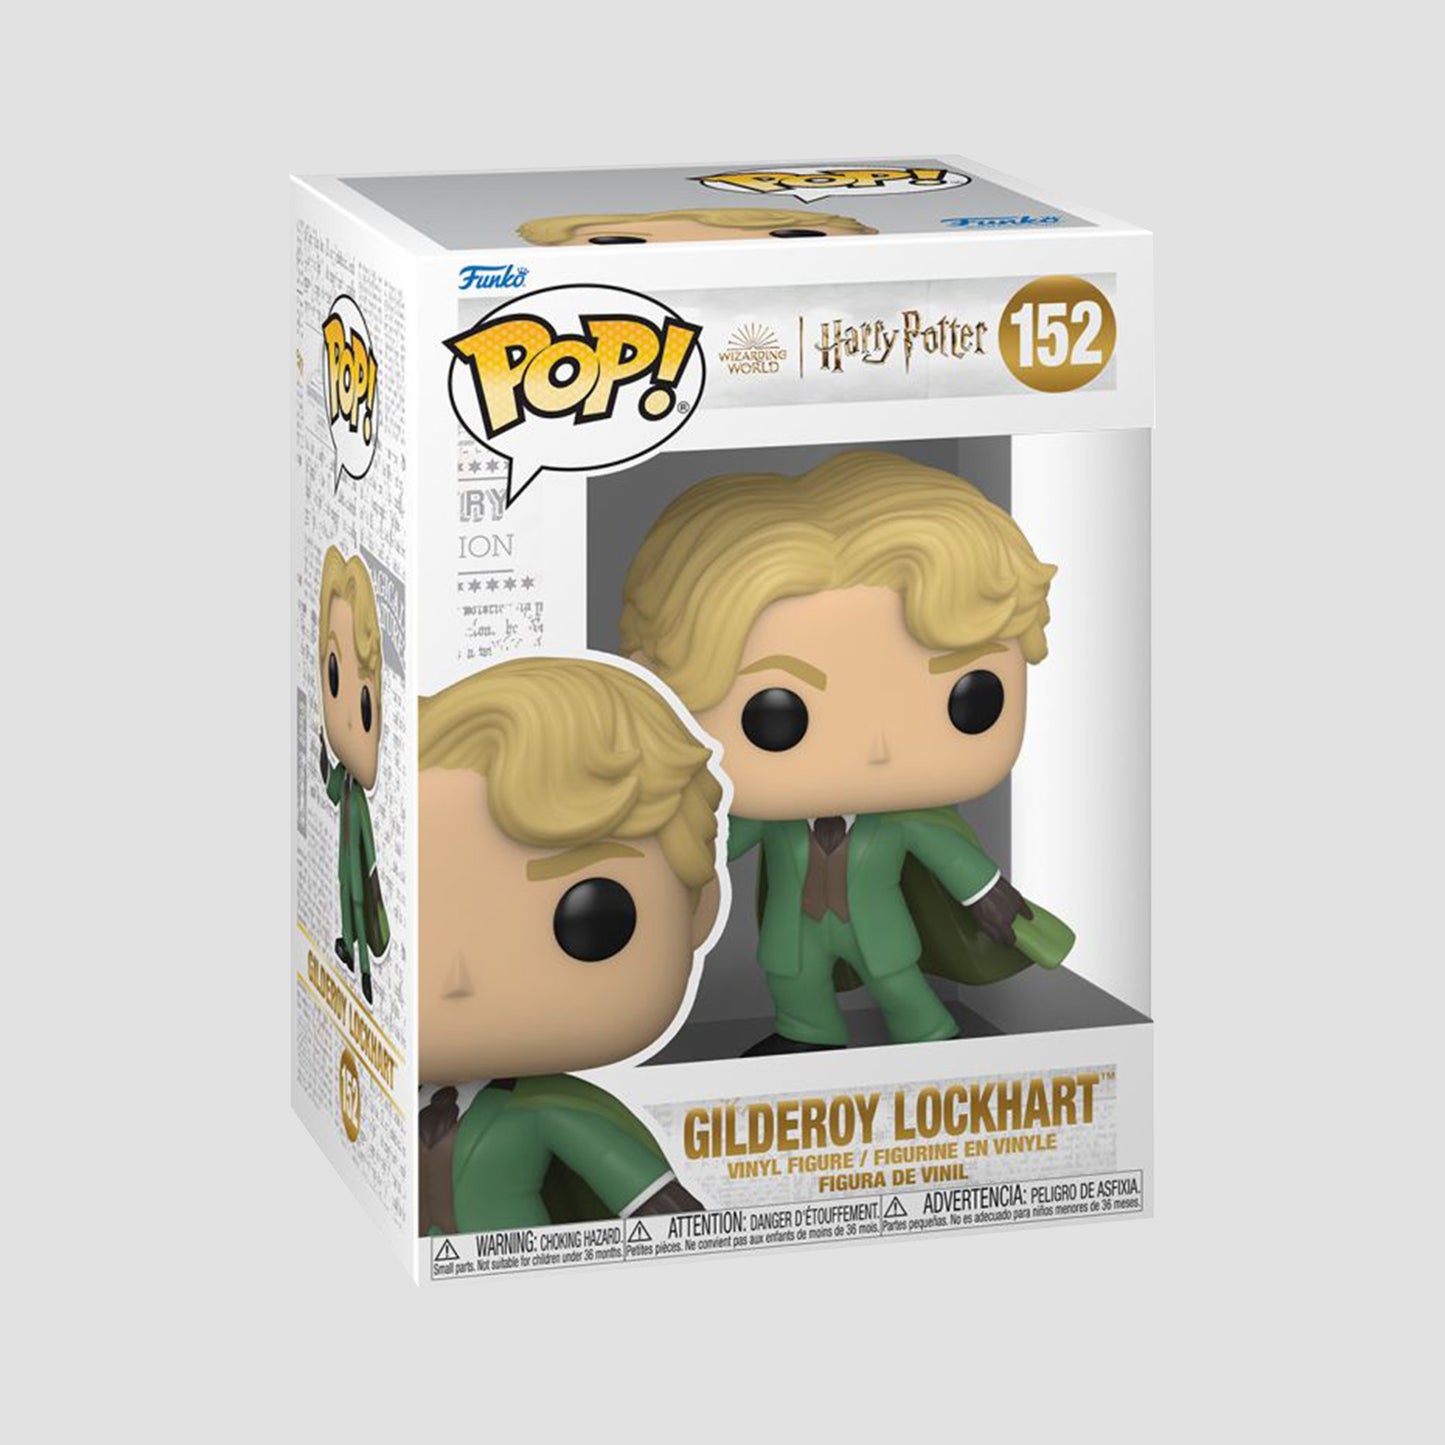 Minerva McGonagall with Hogwarts (Harry Potter) Funko Pop! Town Set –  Collector's Outpost